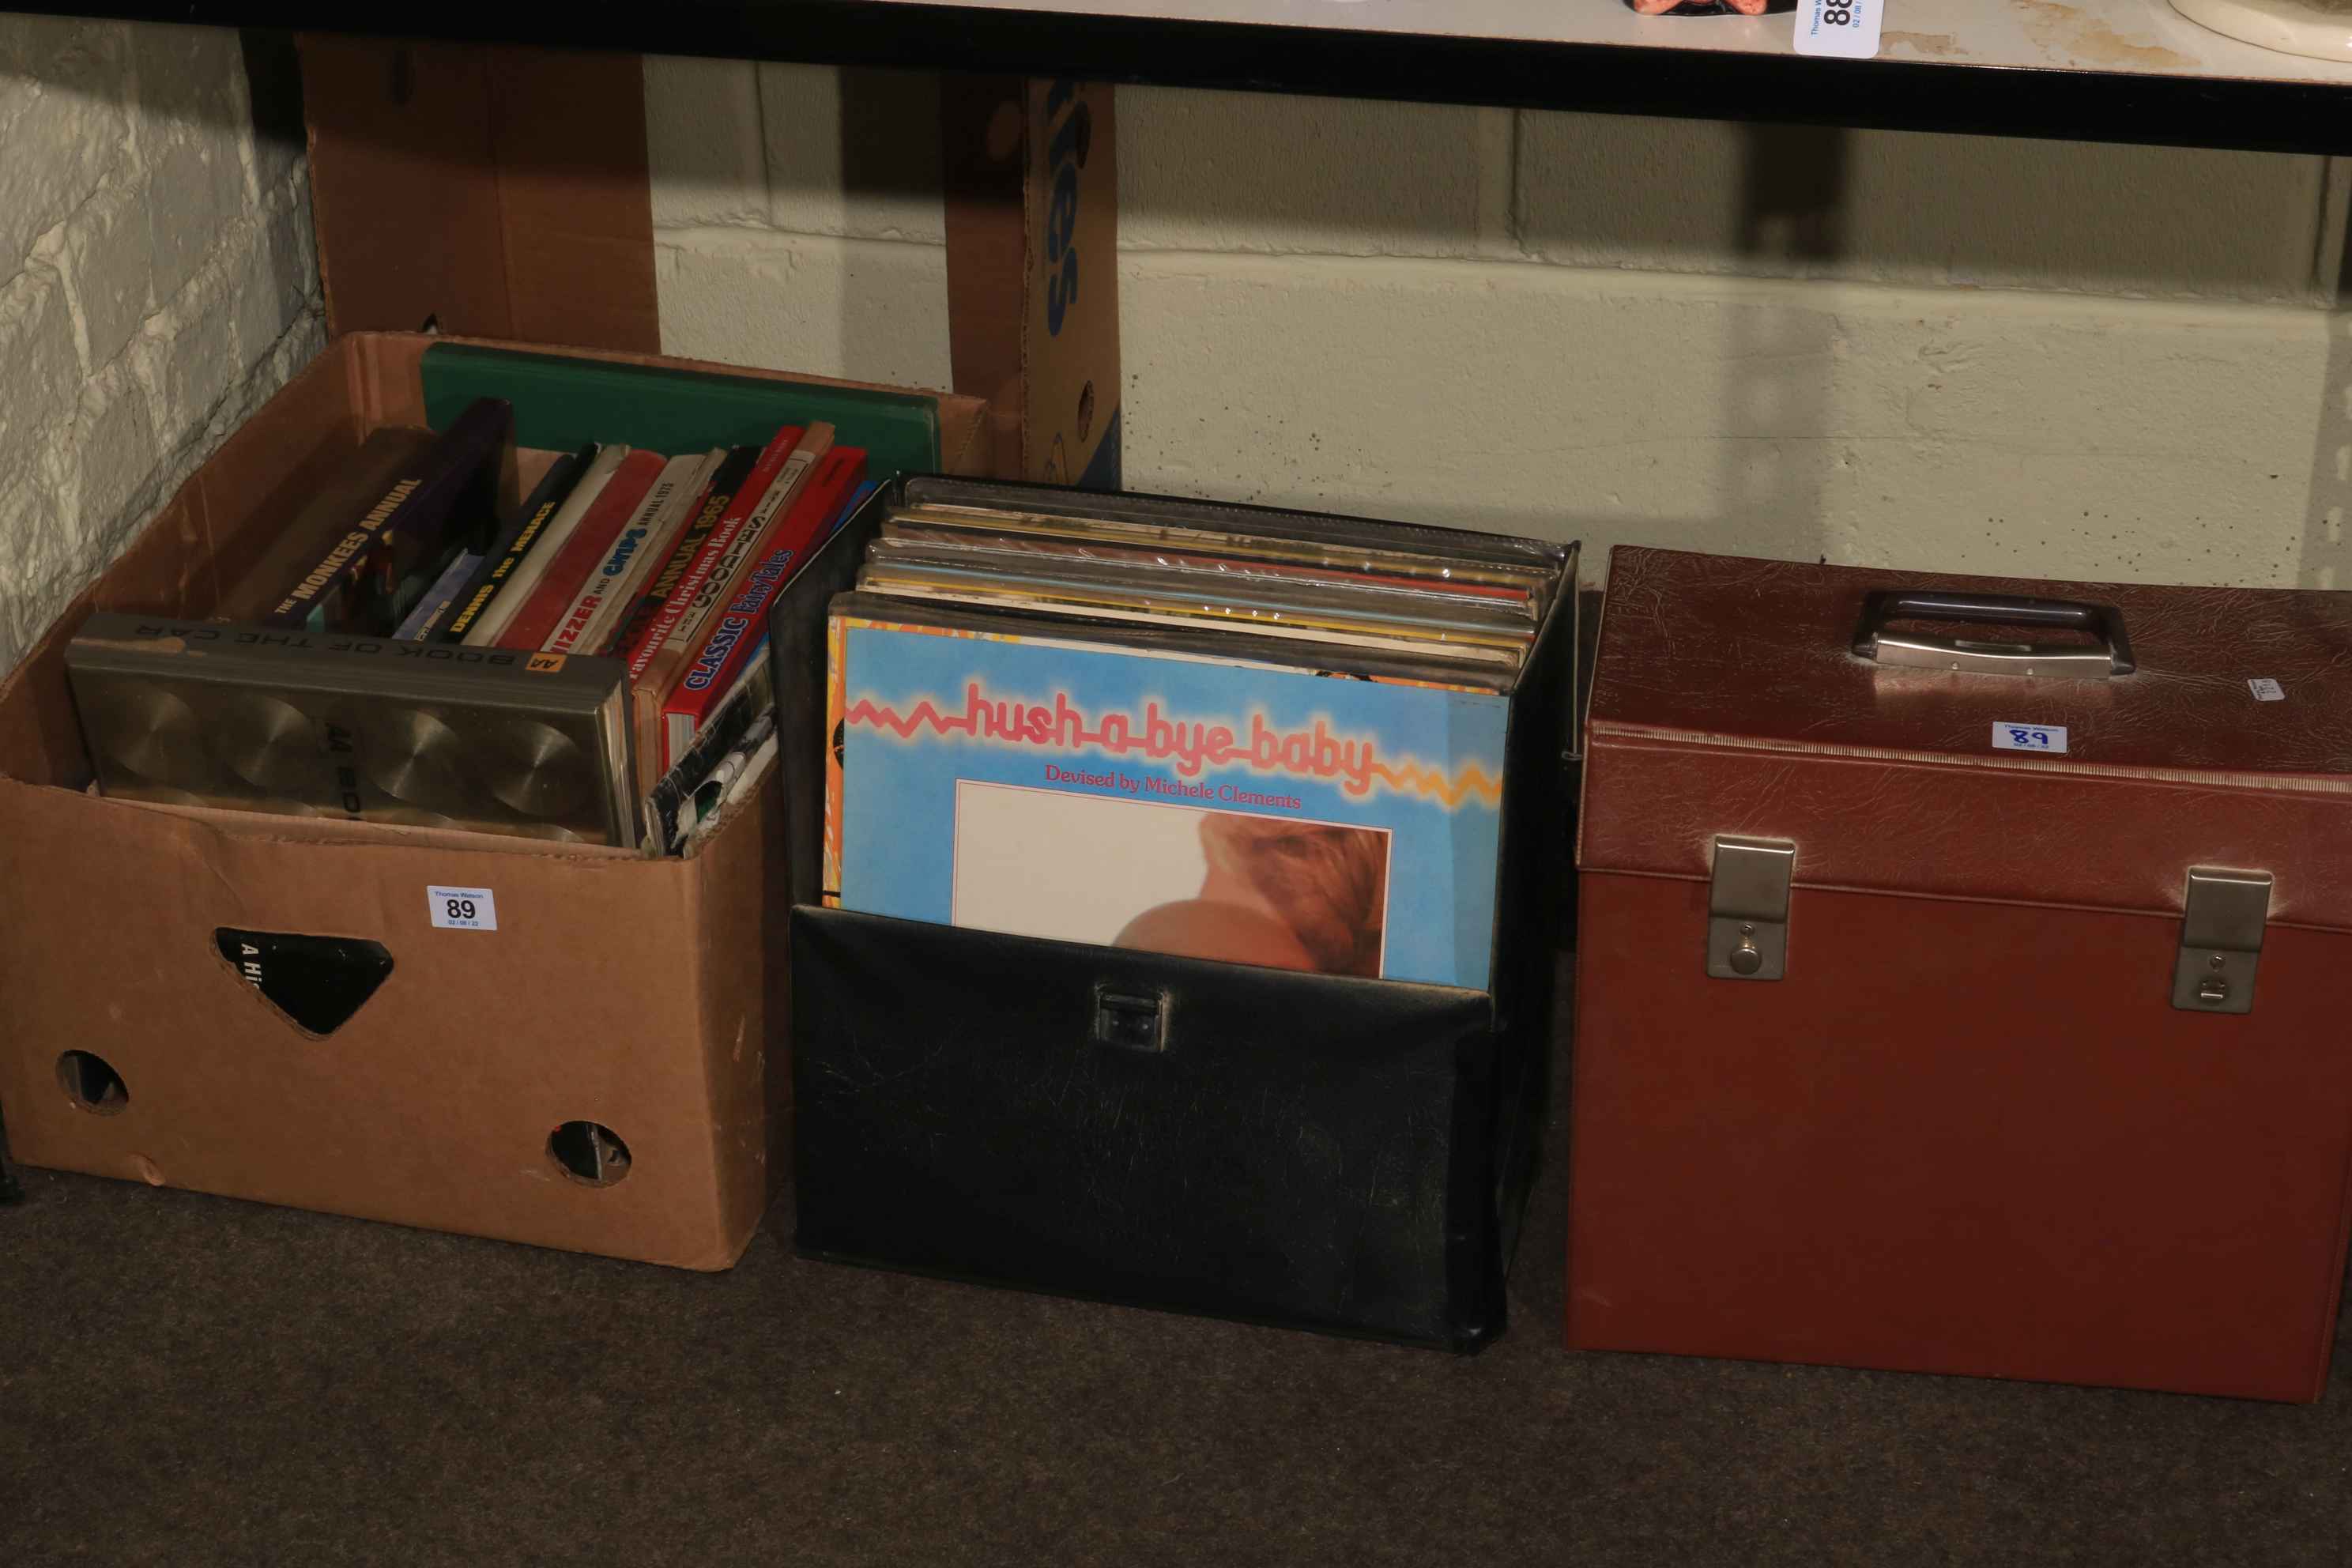 Two cases of LP records and box of books.